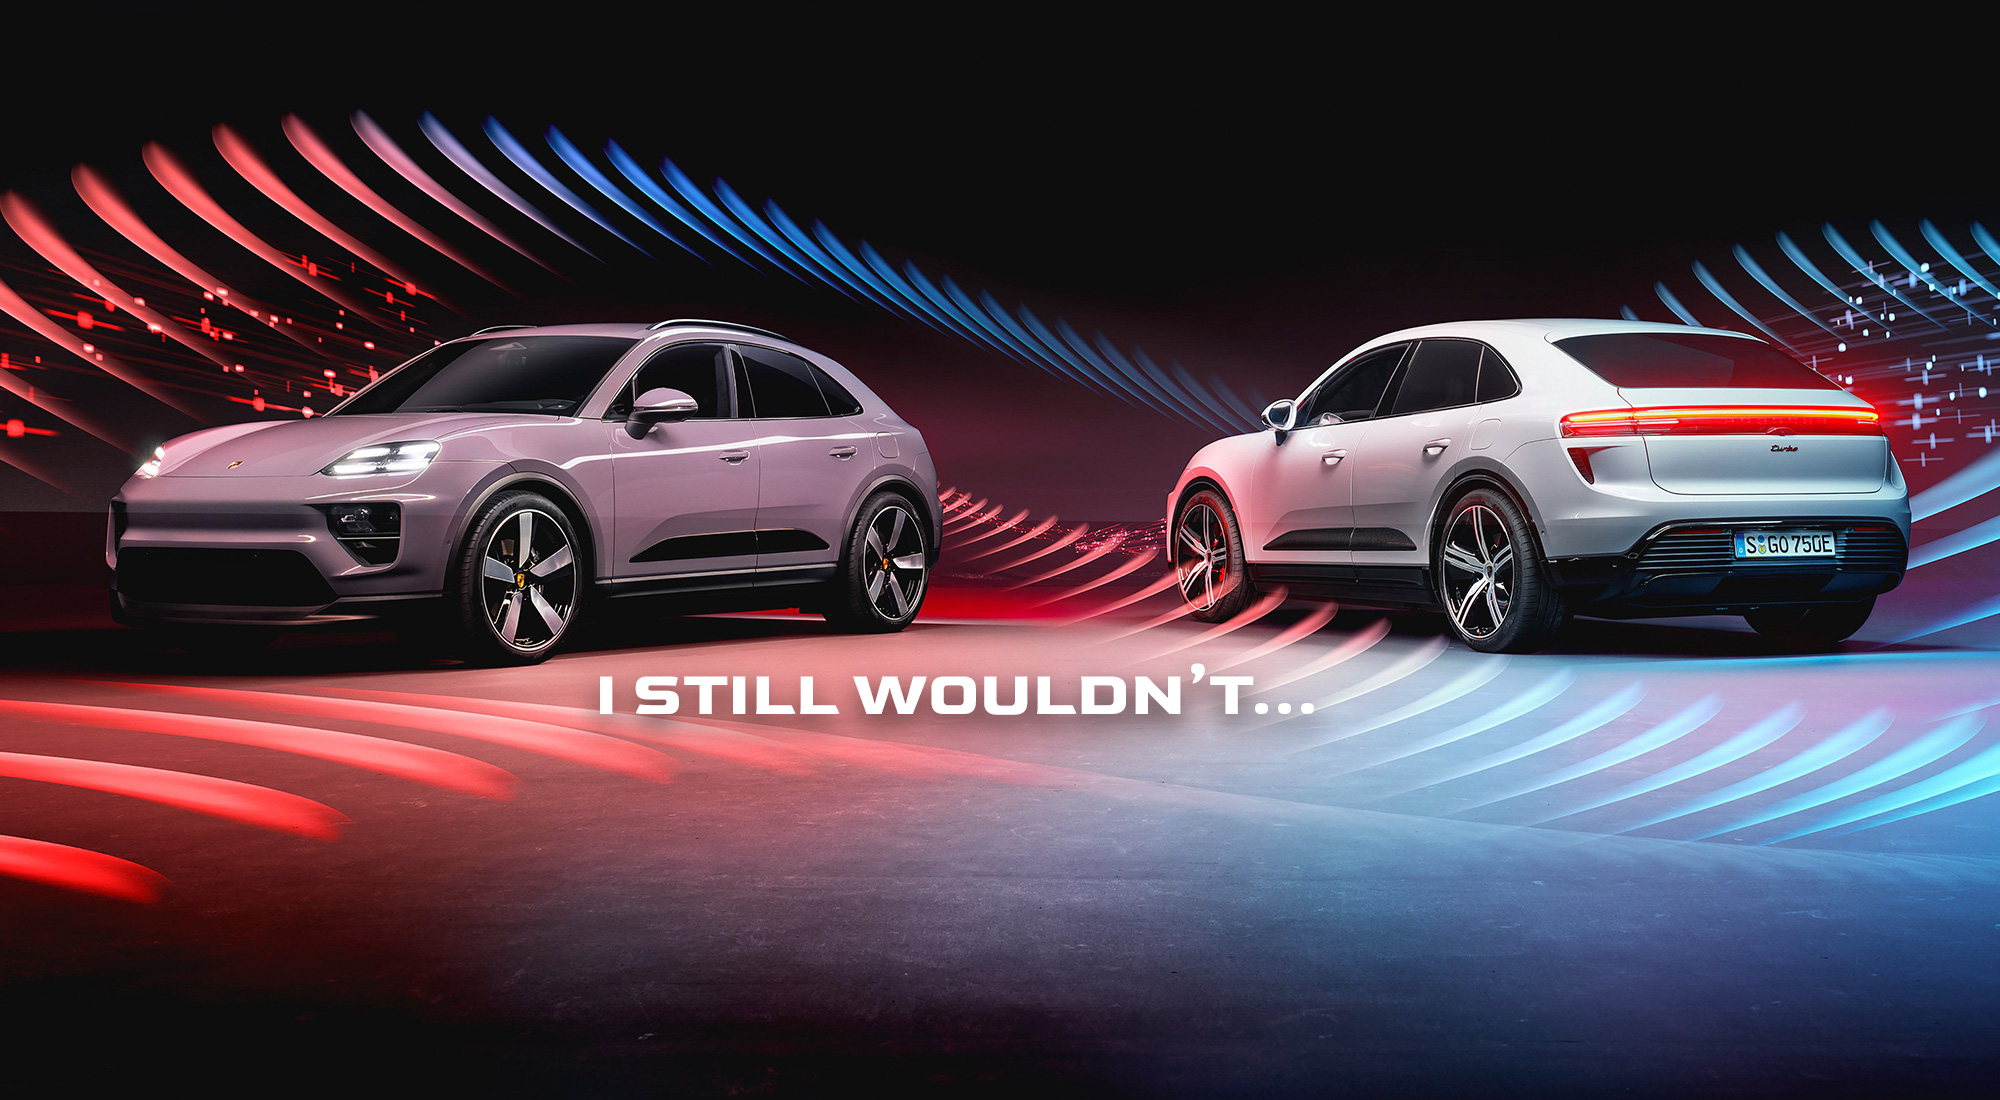 The new Porsche Macan EV is afraid of commitment